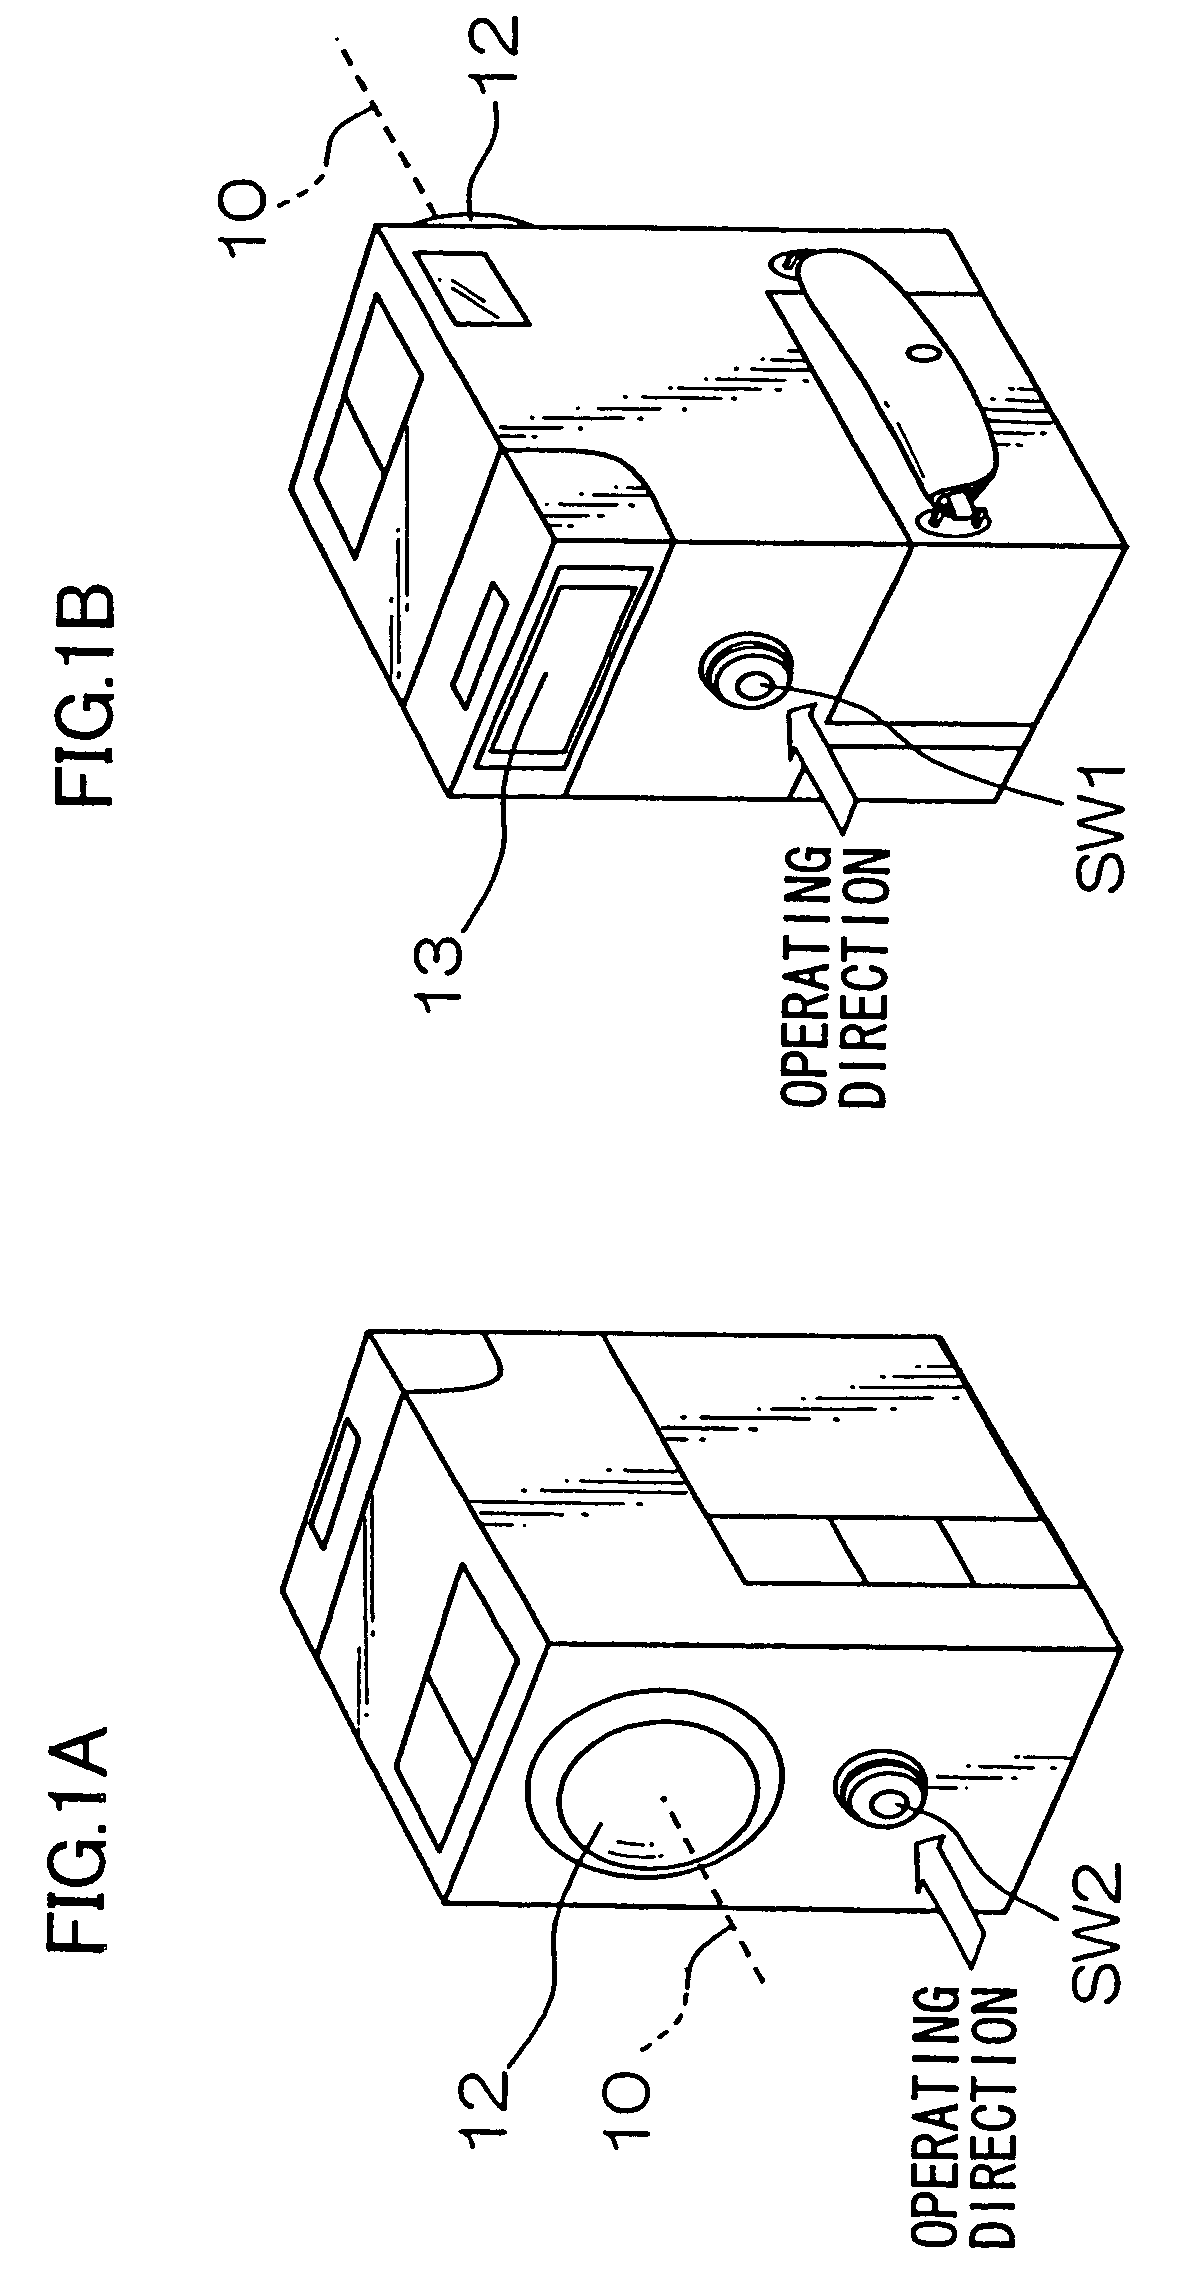 Camera with video capturing button and still capturing button capable of simultaneous operation